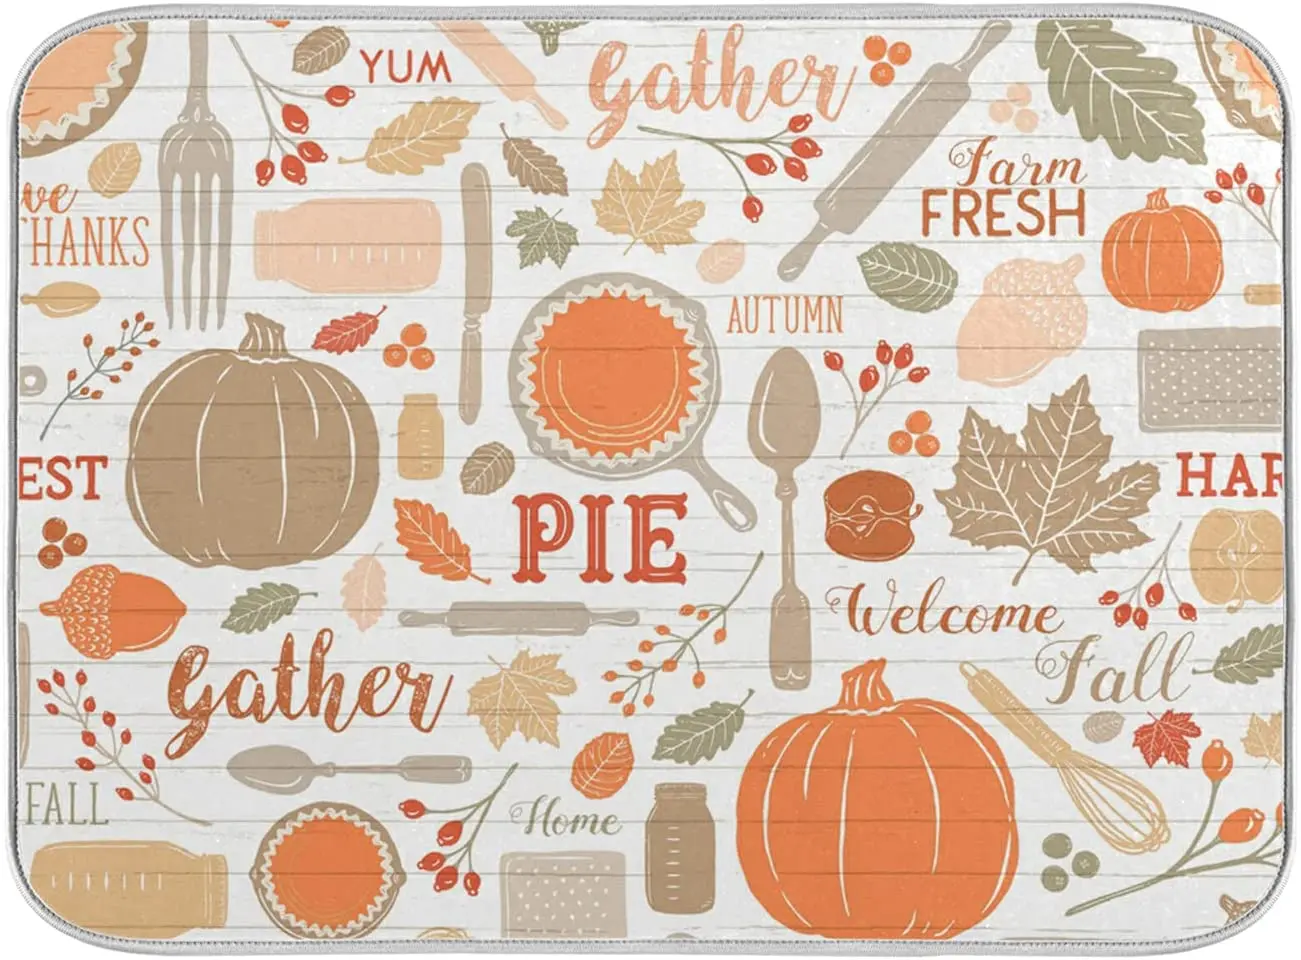 

Absorbent Dish Drying Mat Thanksgiving Pumpkins 18x24 Inch Kitchen Counter Dish Mats for Dishes